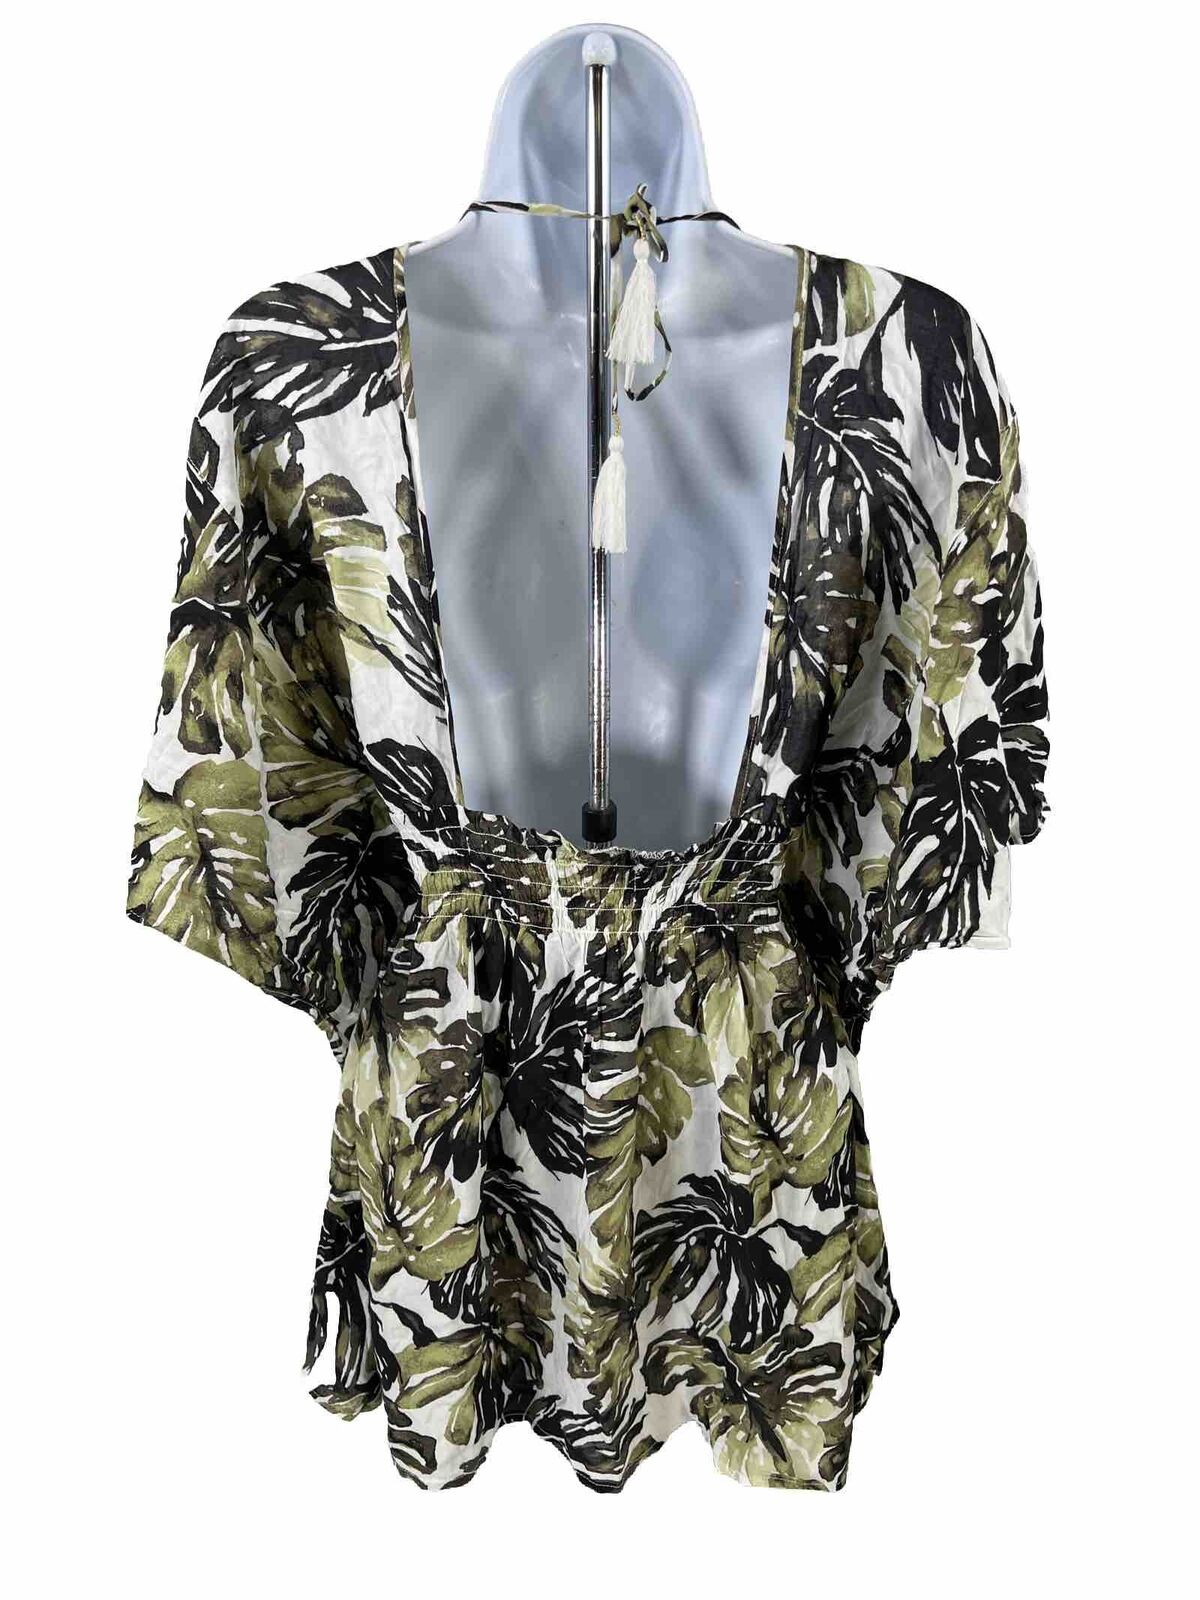 Abercrombie and Fitch Women's Green Palm Print Open Back Boho Top - XS/S